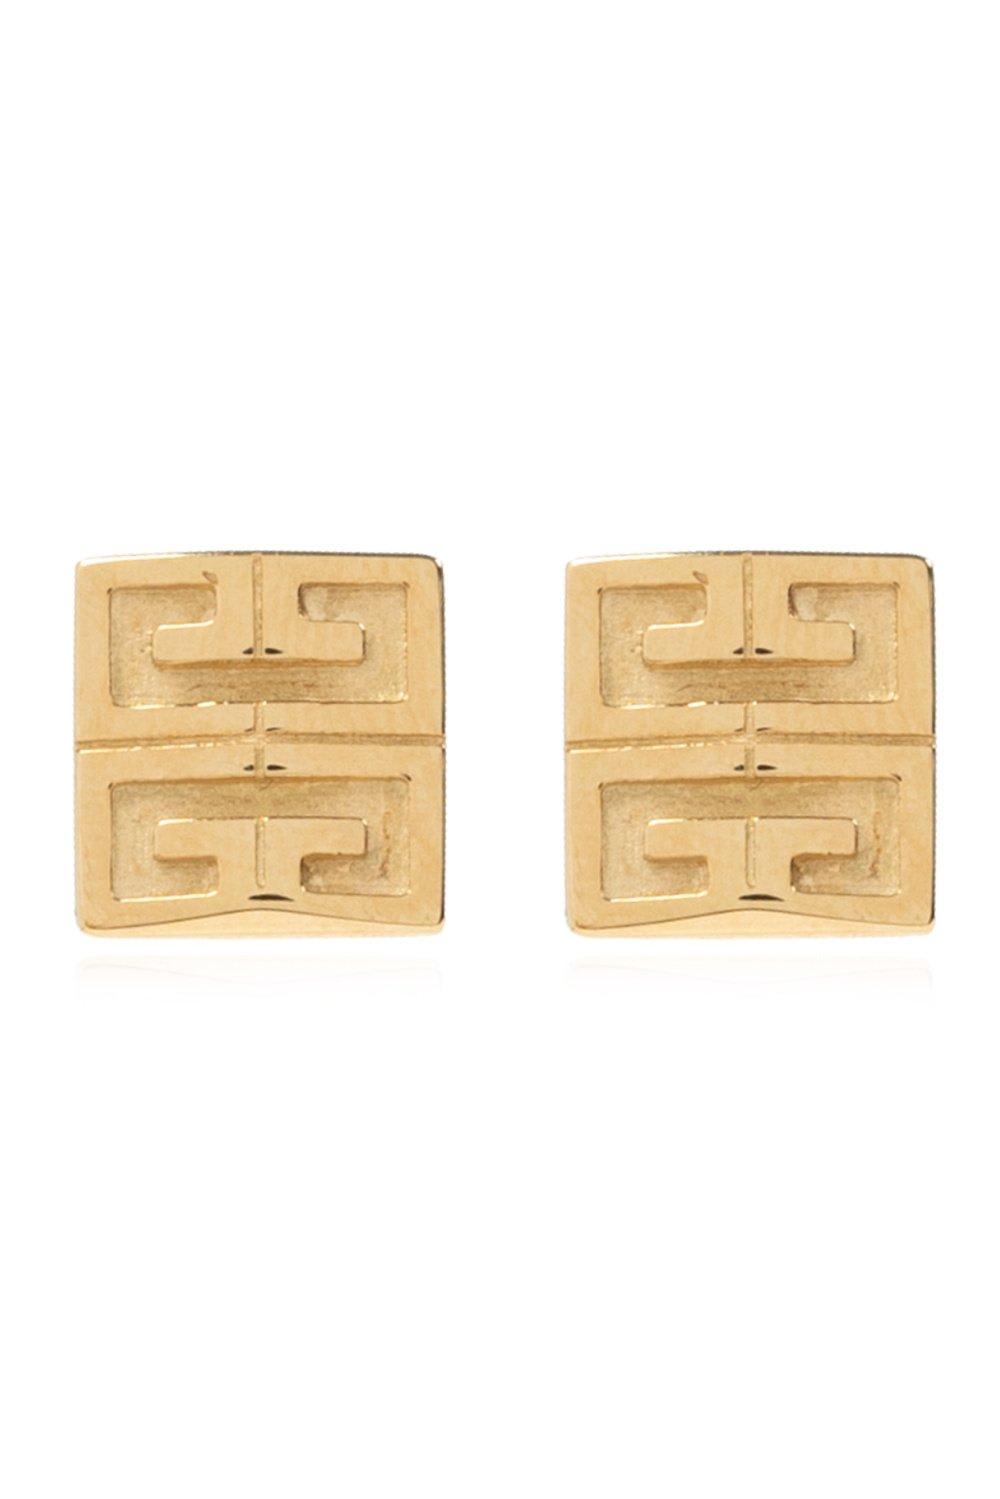 GIVENCHY G LOGO EMBOSSED STUD EARRINGS